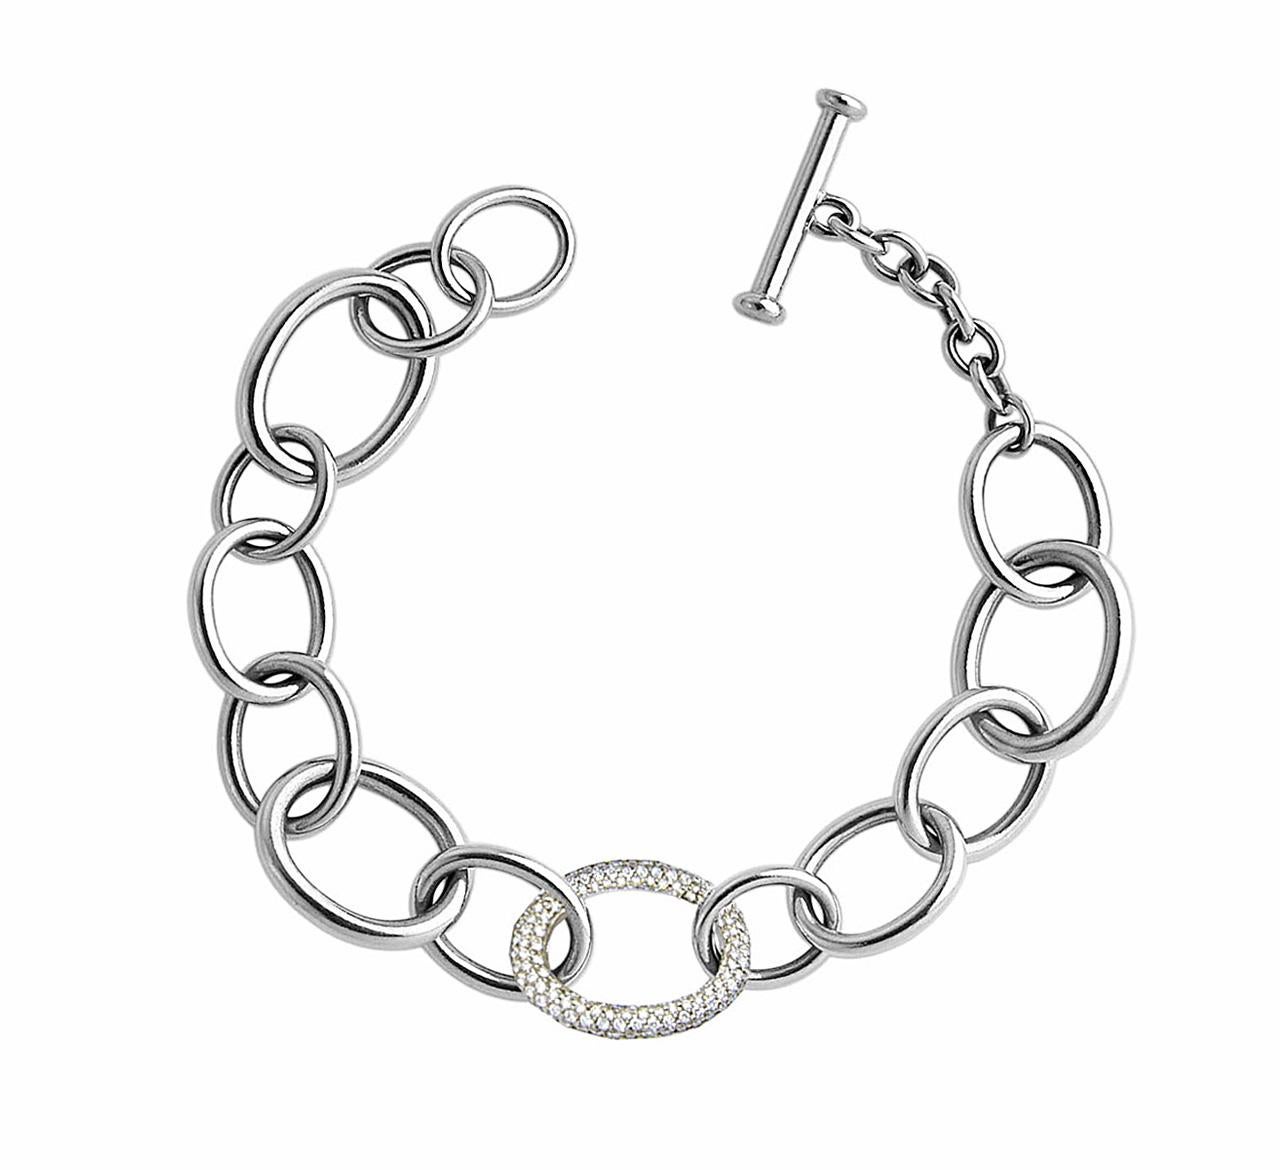 A classic 18 k white gold bracelet got an elegant twist with the one diamond loop (279 diamonds 1.42 ct TW/IF It). It is designed by Colleen B. Rosenblat. 

